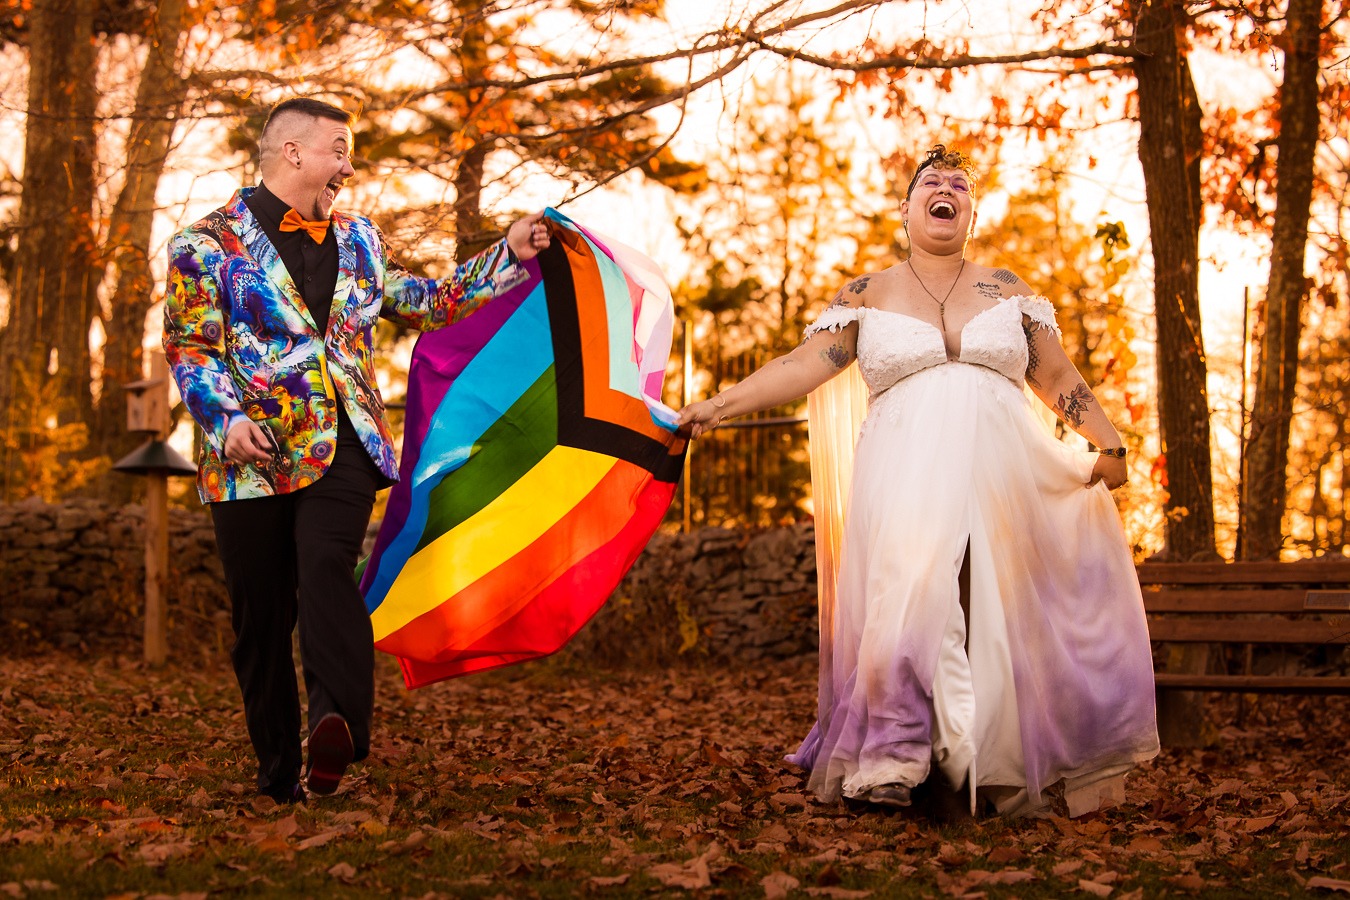 washington dc lgbtq inclusive wedding photographer, lisa rhinehart, captures the couple as they walk with joy through the woods holding their rainbow flag smiling and laughing with one another 